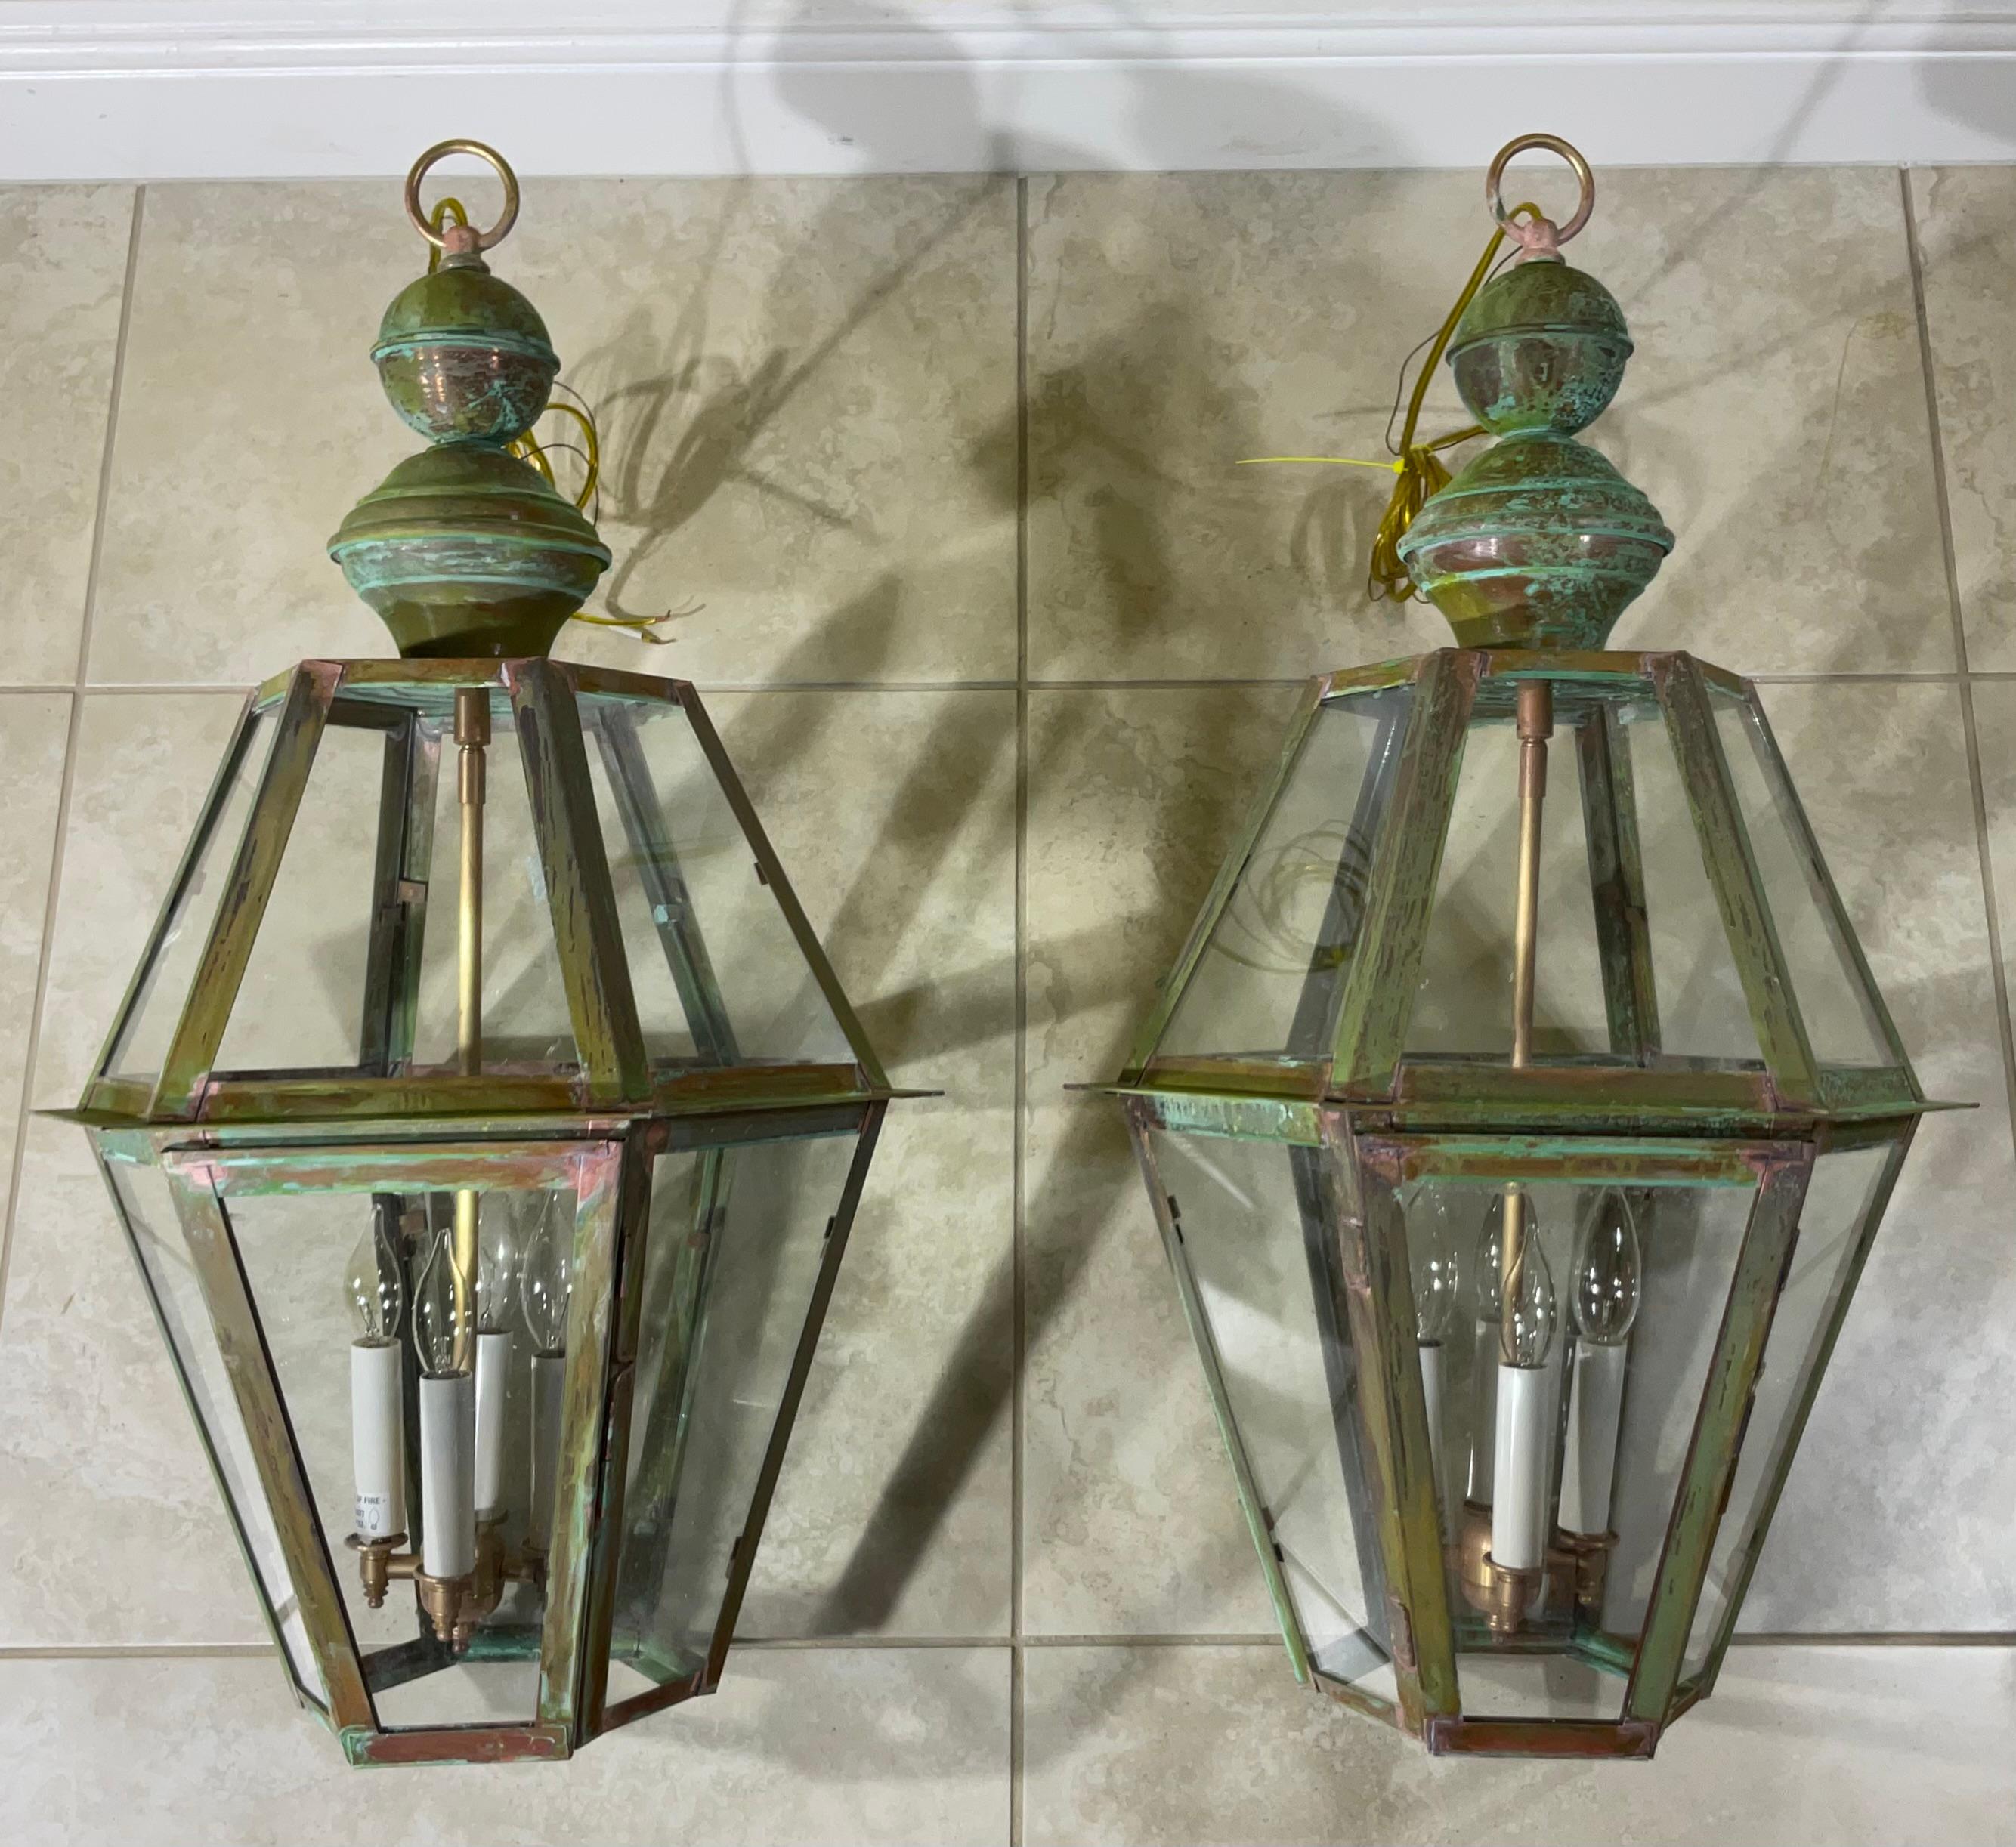 Pair Of Six Sides Solid Copper And Brass Handcrafted Hanging Lanterns In Good Condition For Sale In Delray Beach, FL